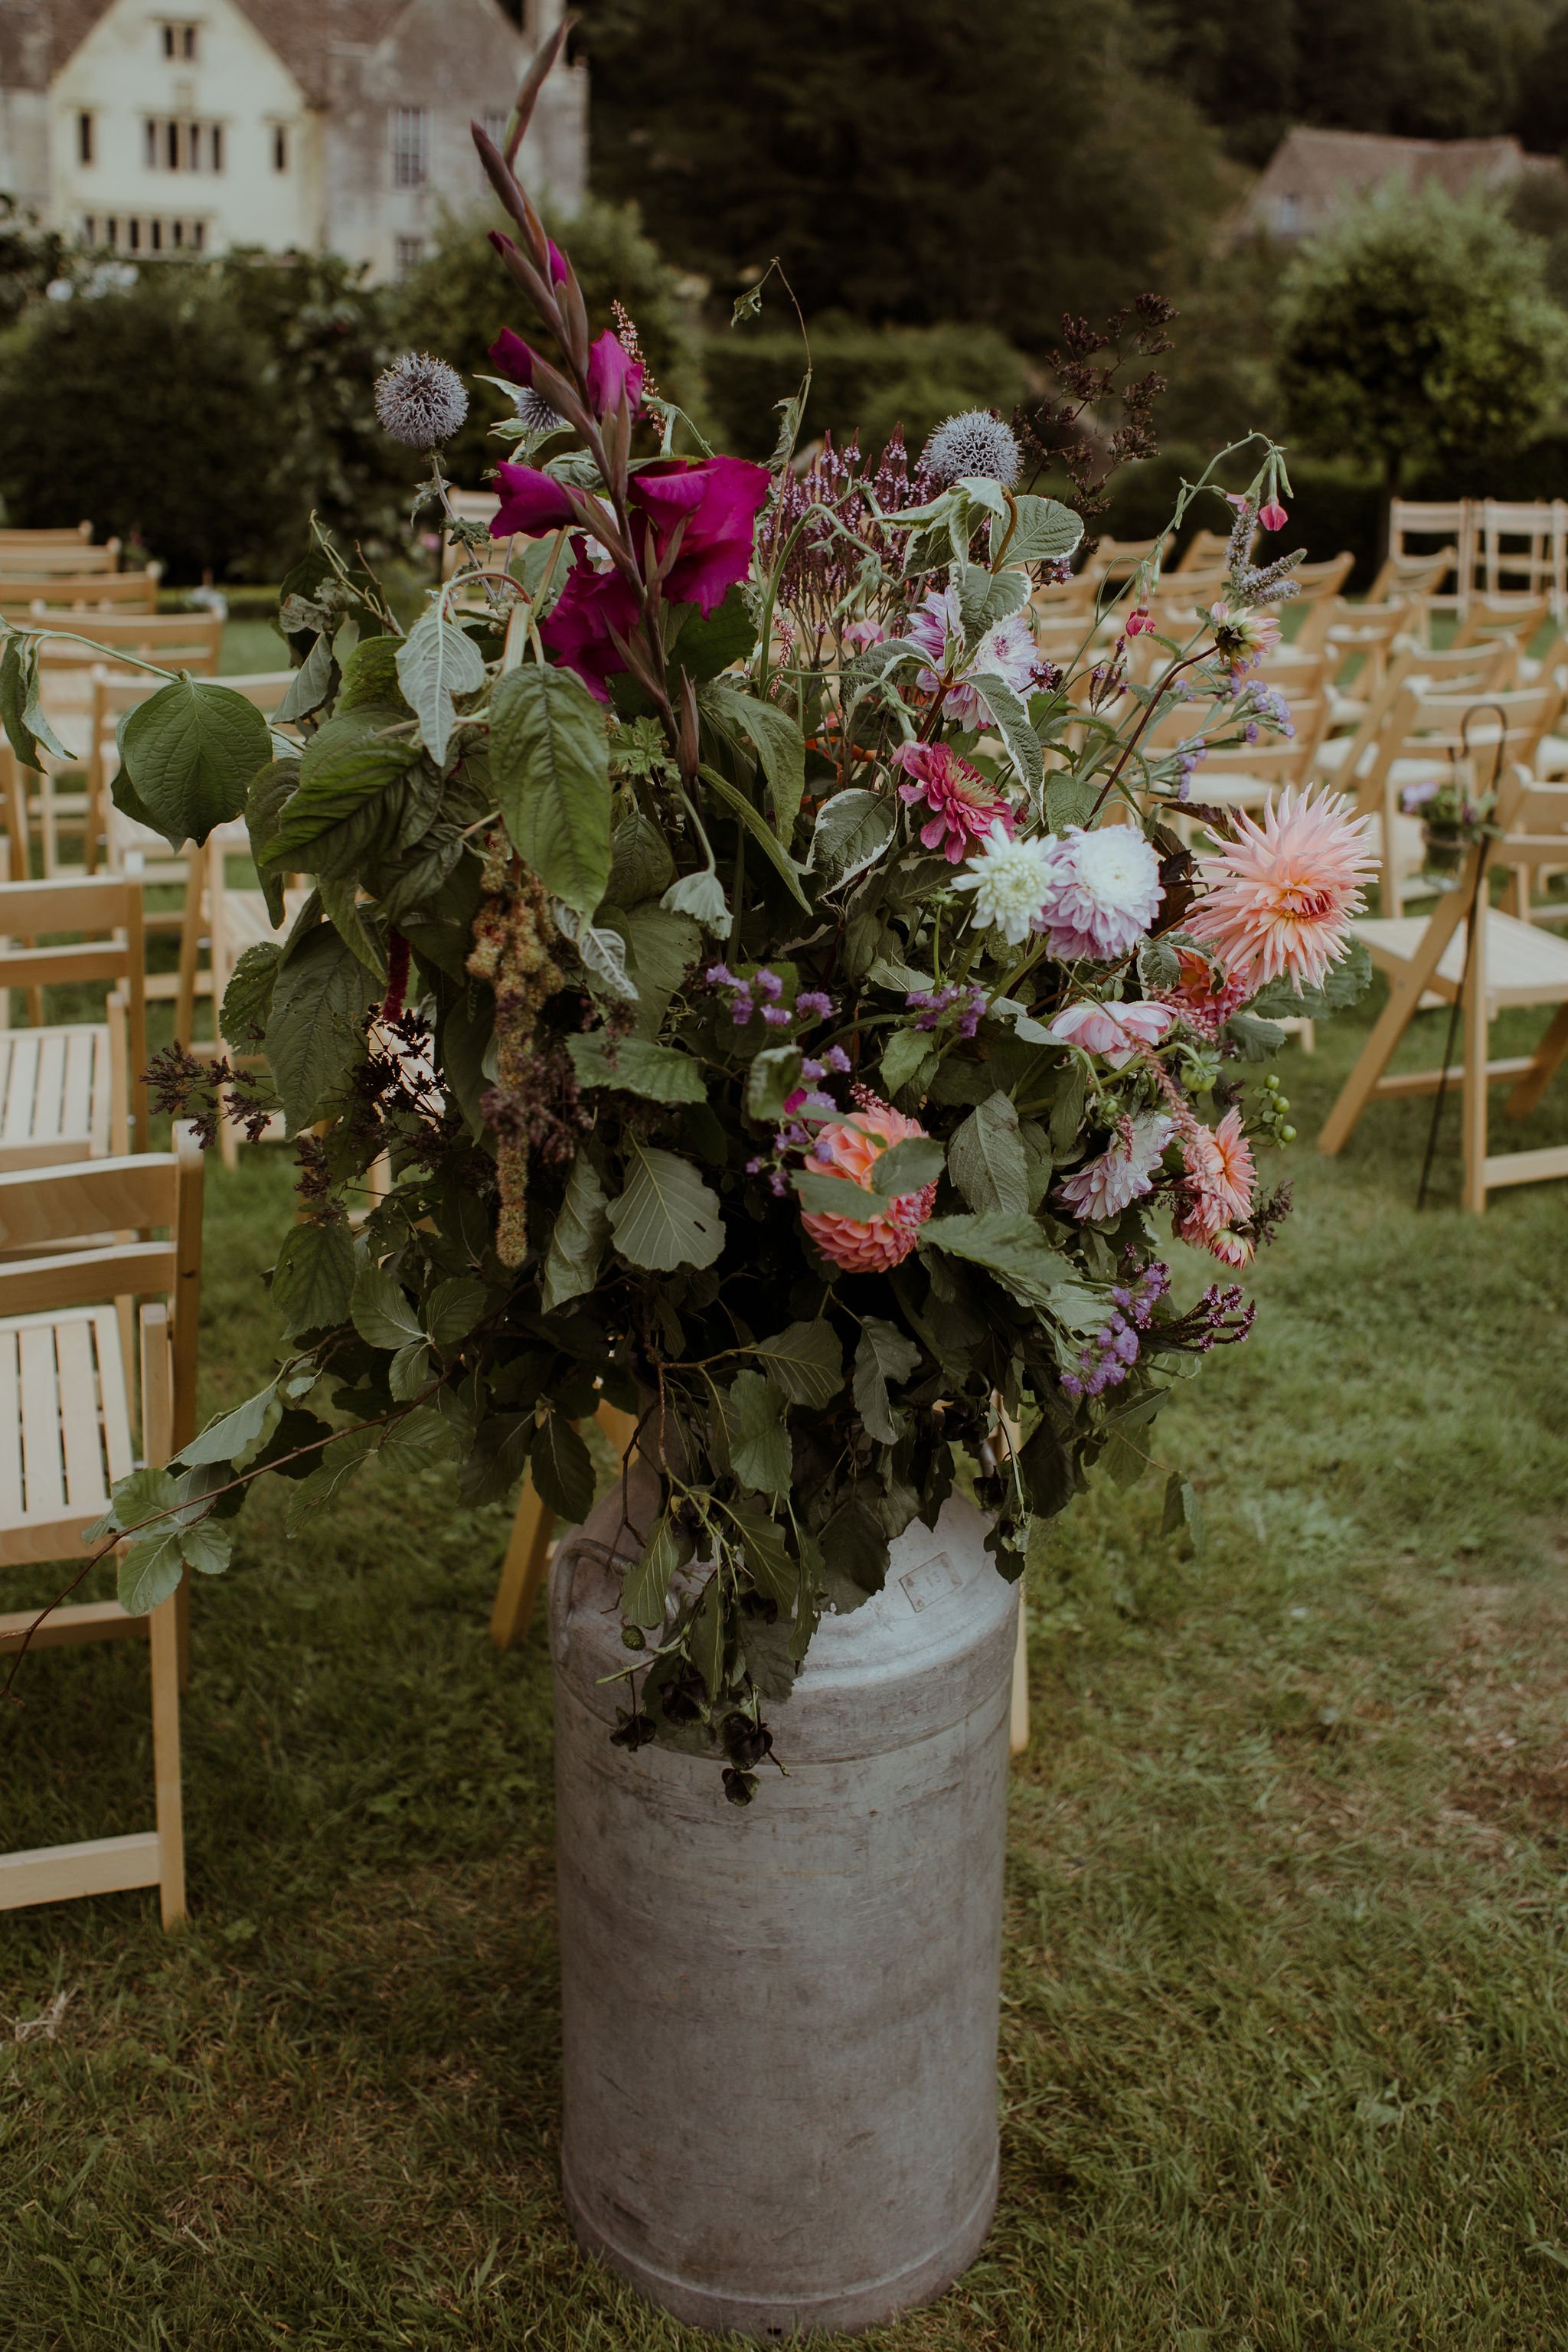 English summer florals at Owlpen Manor for outdoor wedding ceremony